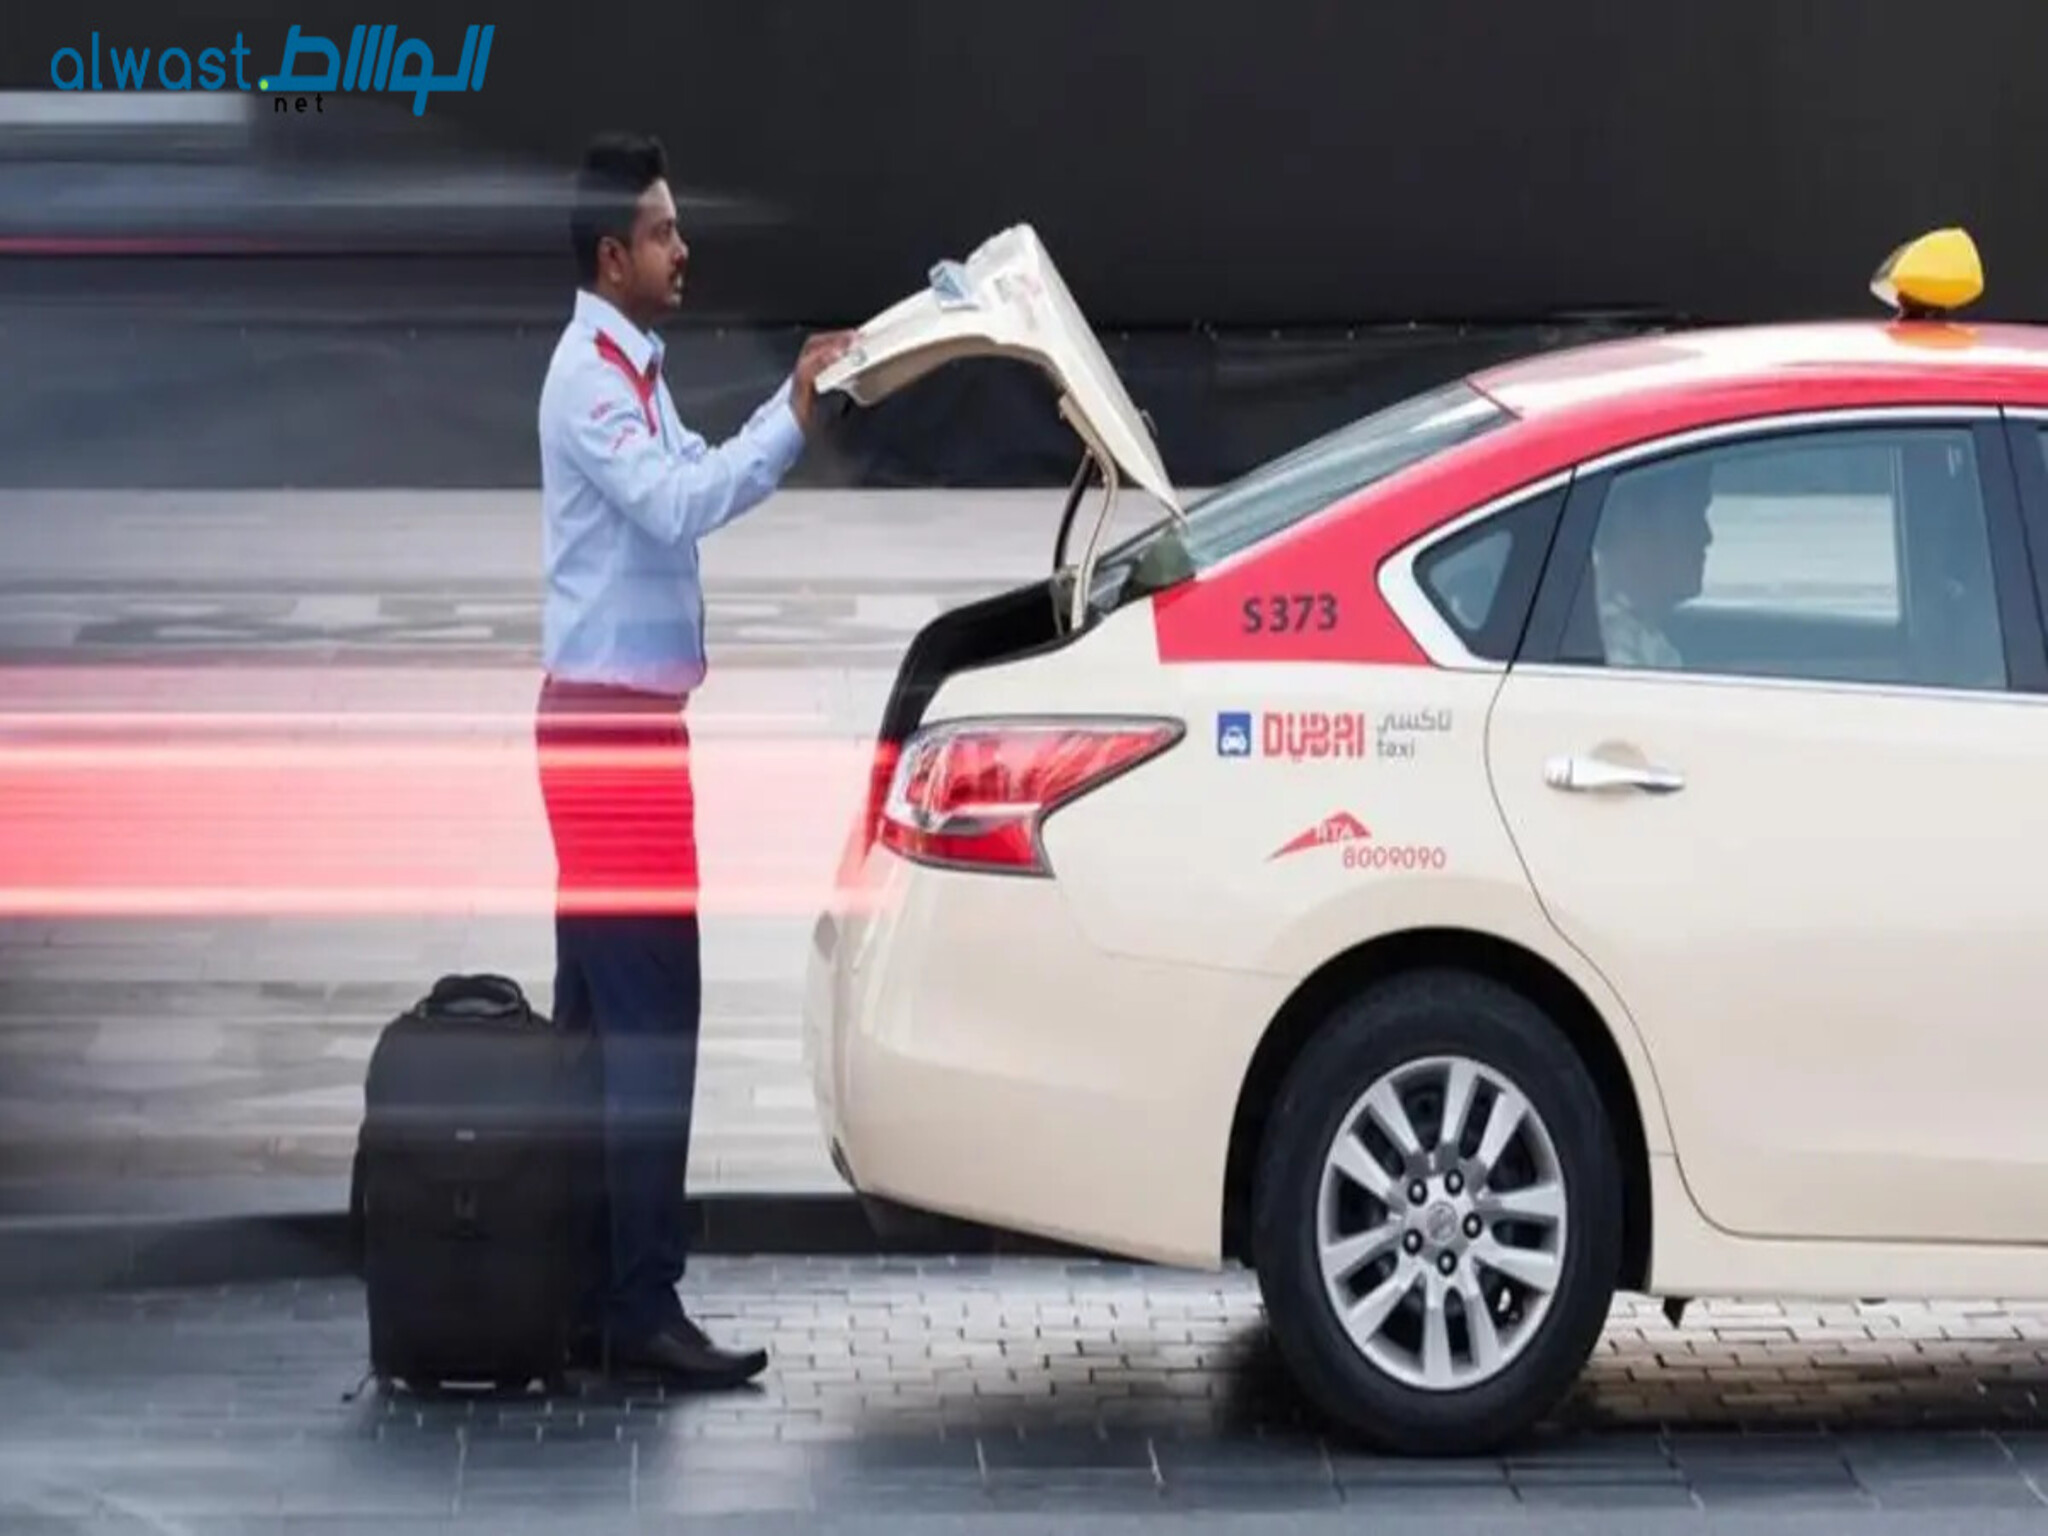 The Emirates Introduces new fare for taxis